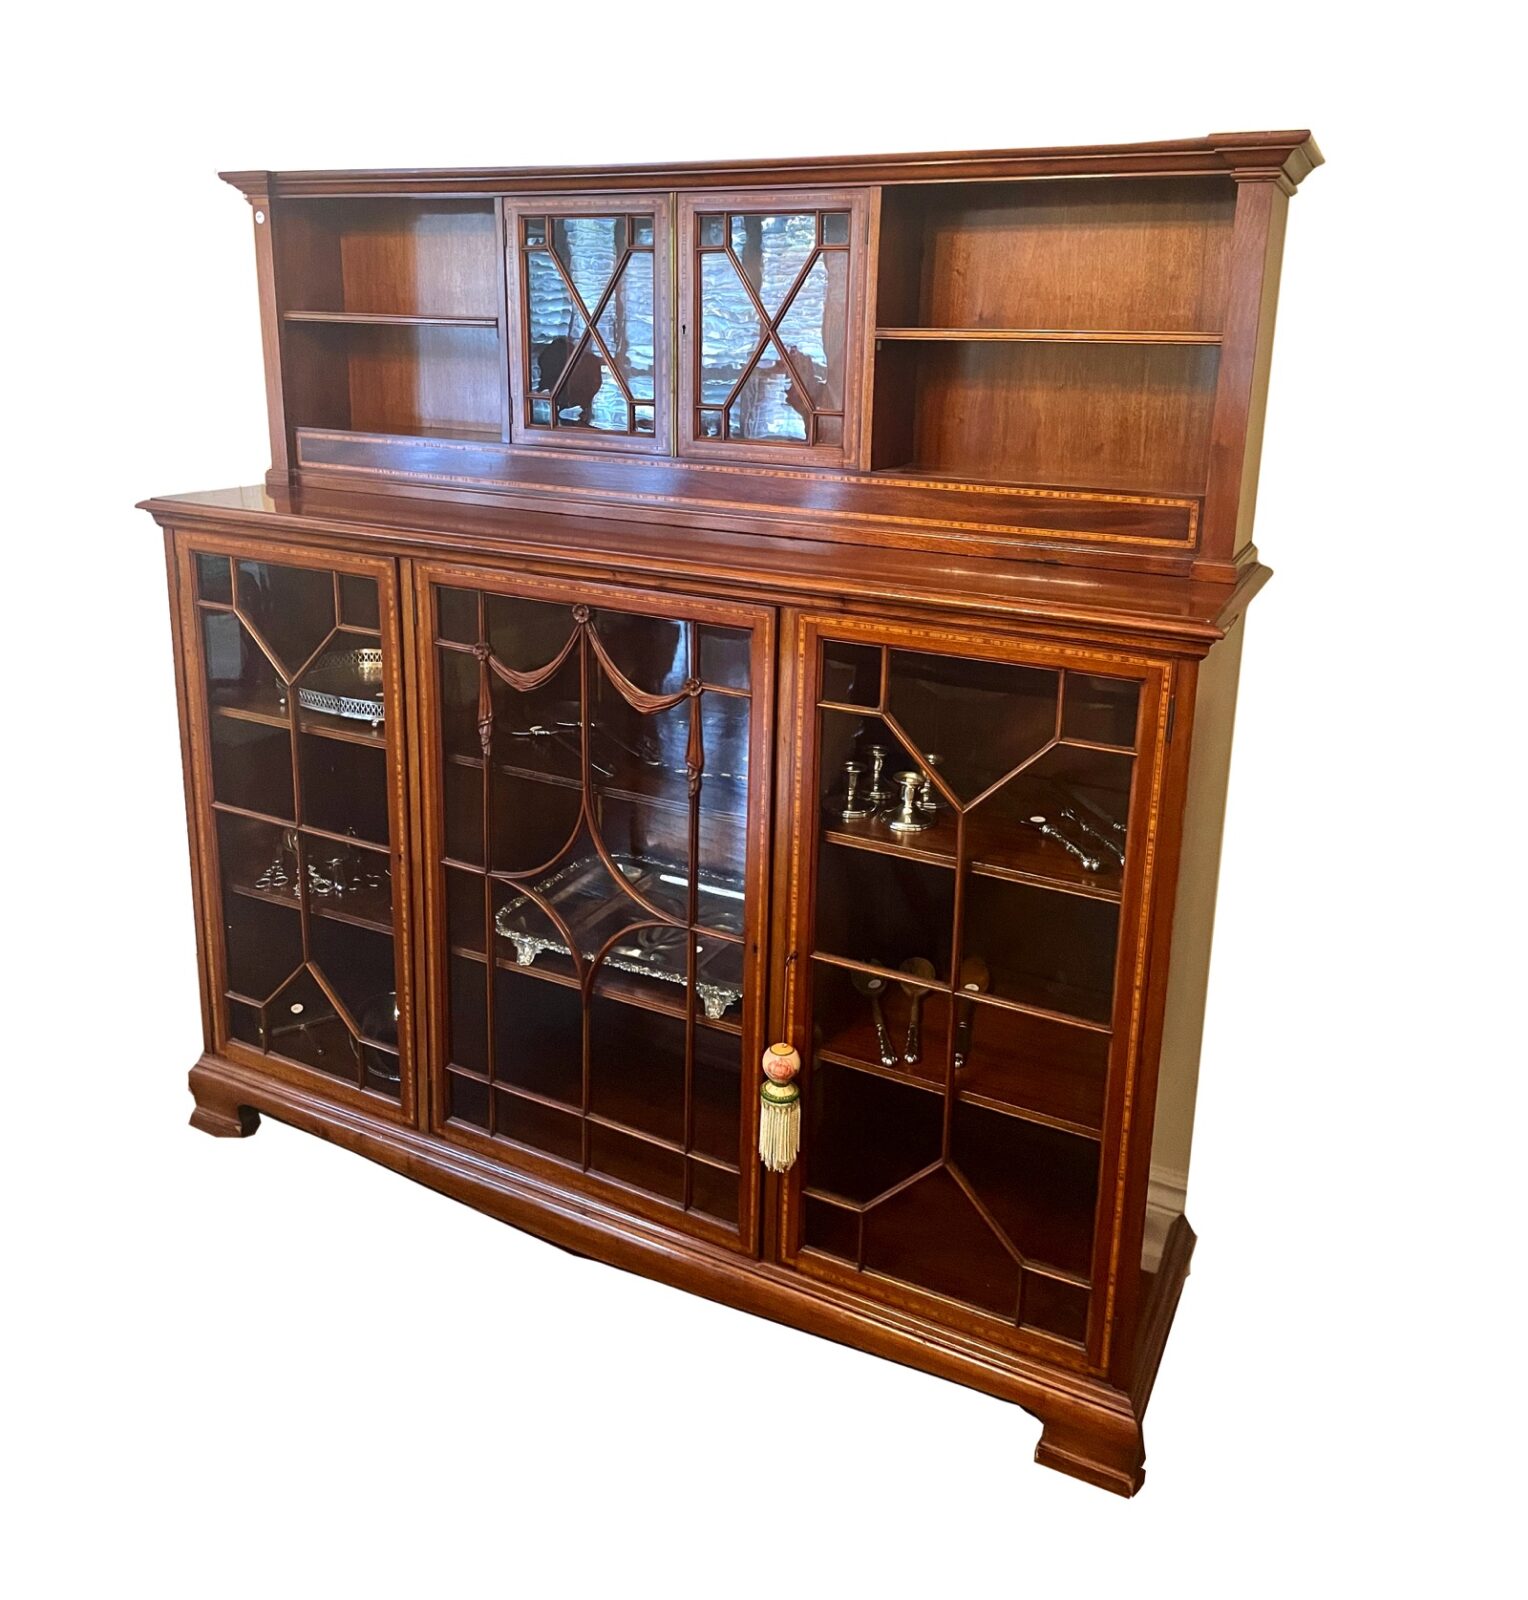 Long, Large Edwardian Period Display Cabinet / Bookcase by